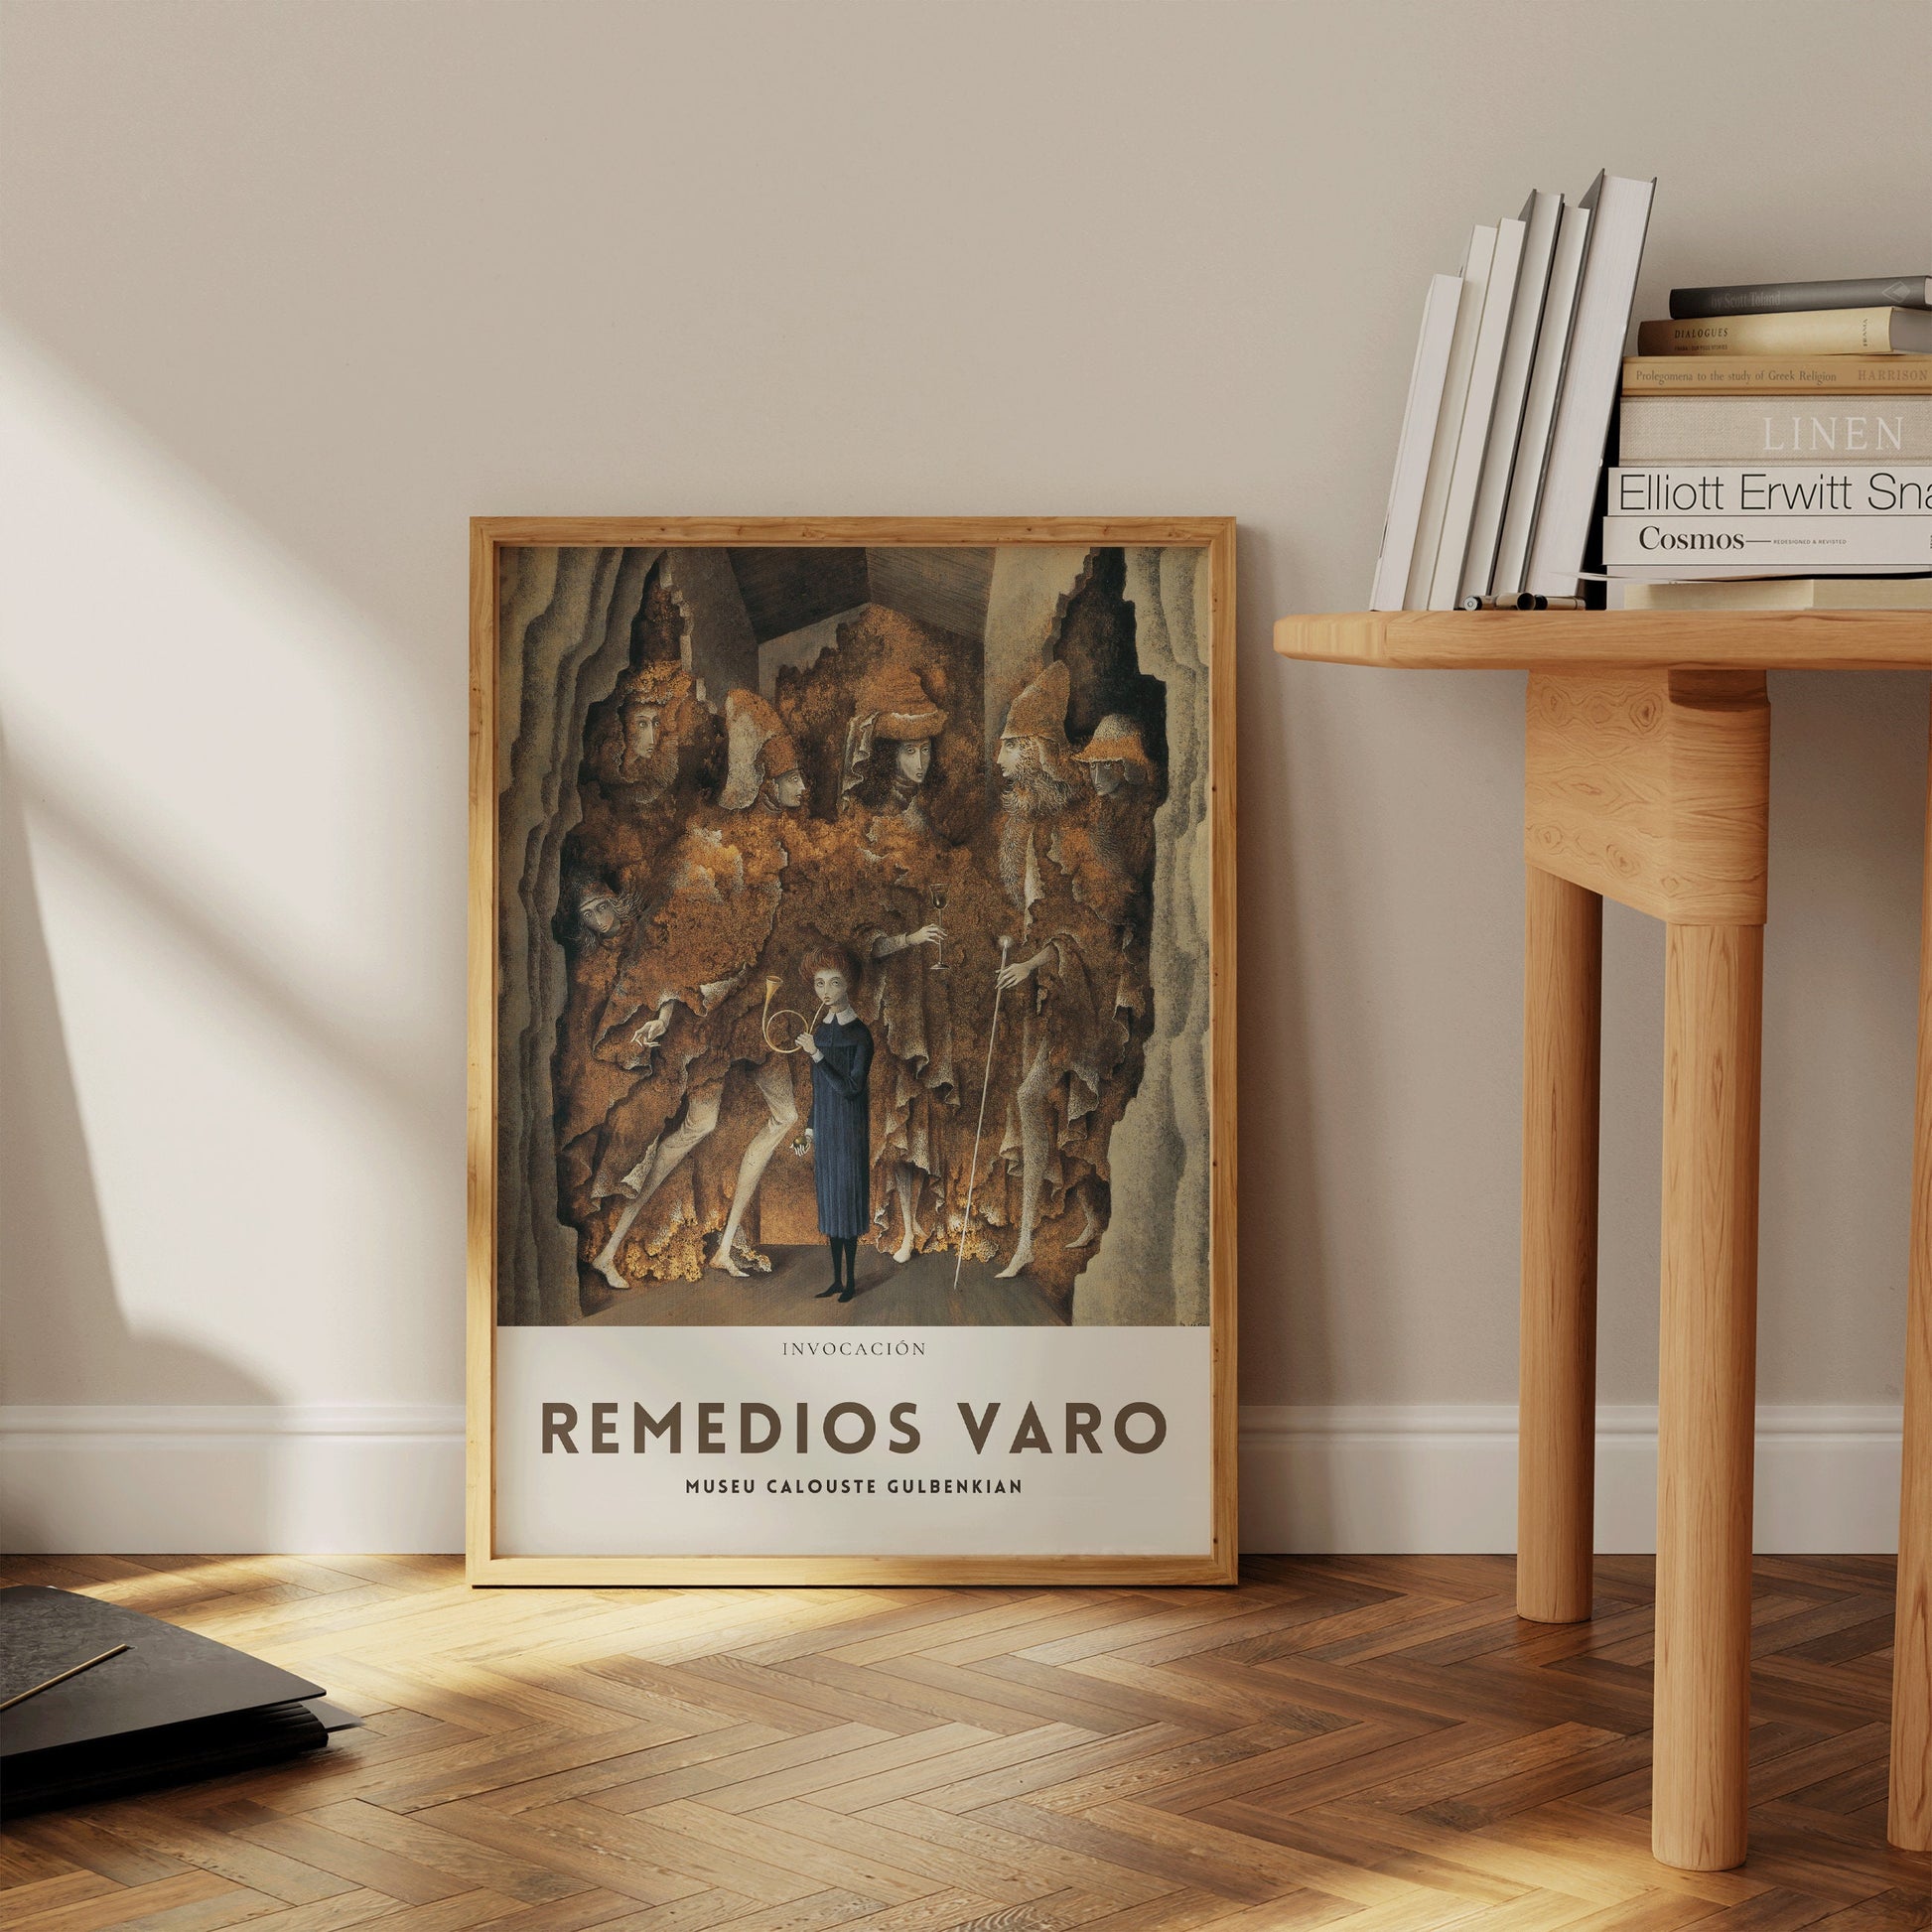 Remedios Varo The Invocation Fine Surreal Art Famous Mexican Iconic Painting Vintage Ready to hang Framed Home Office Decor Print Gift Idea